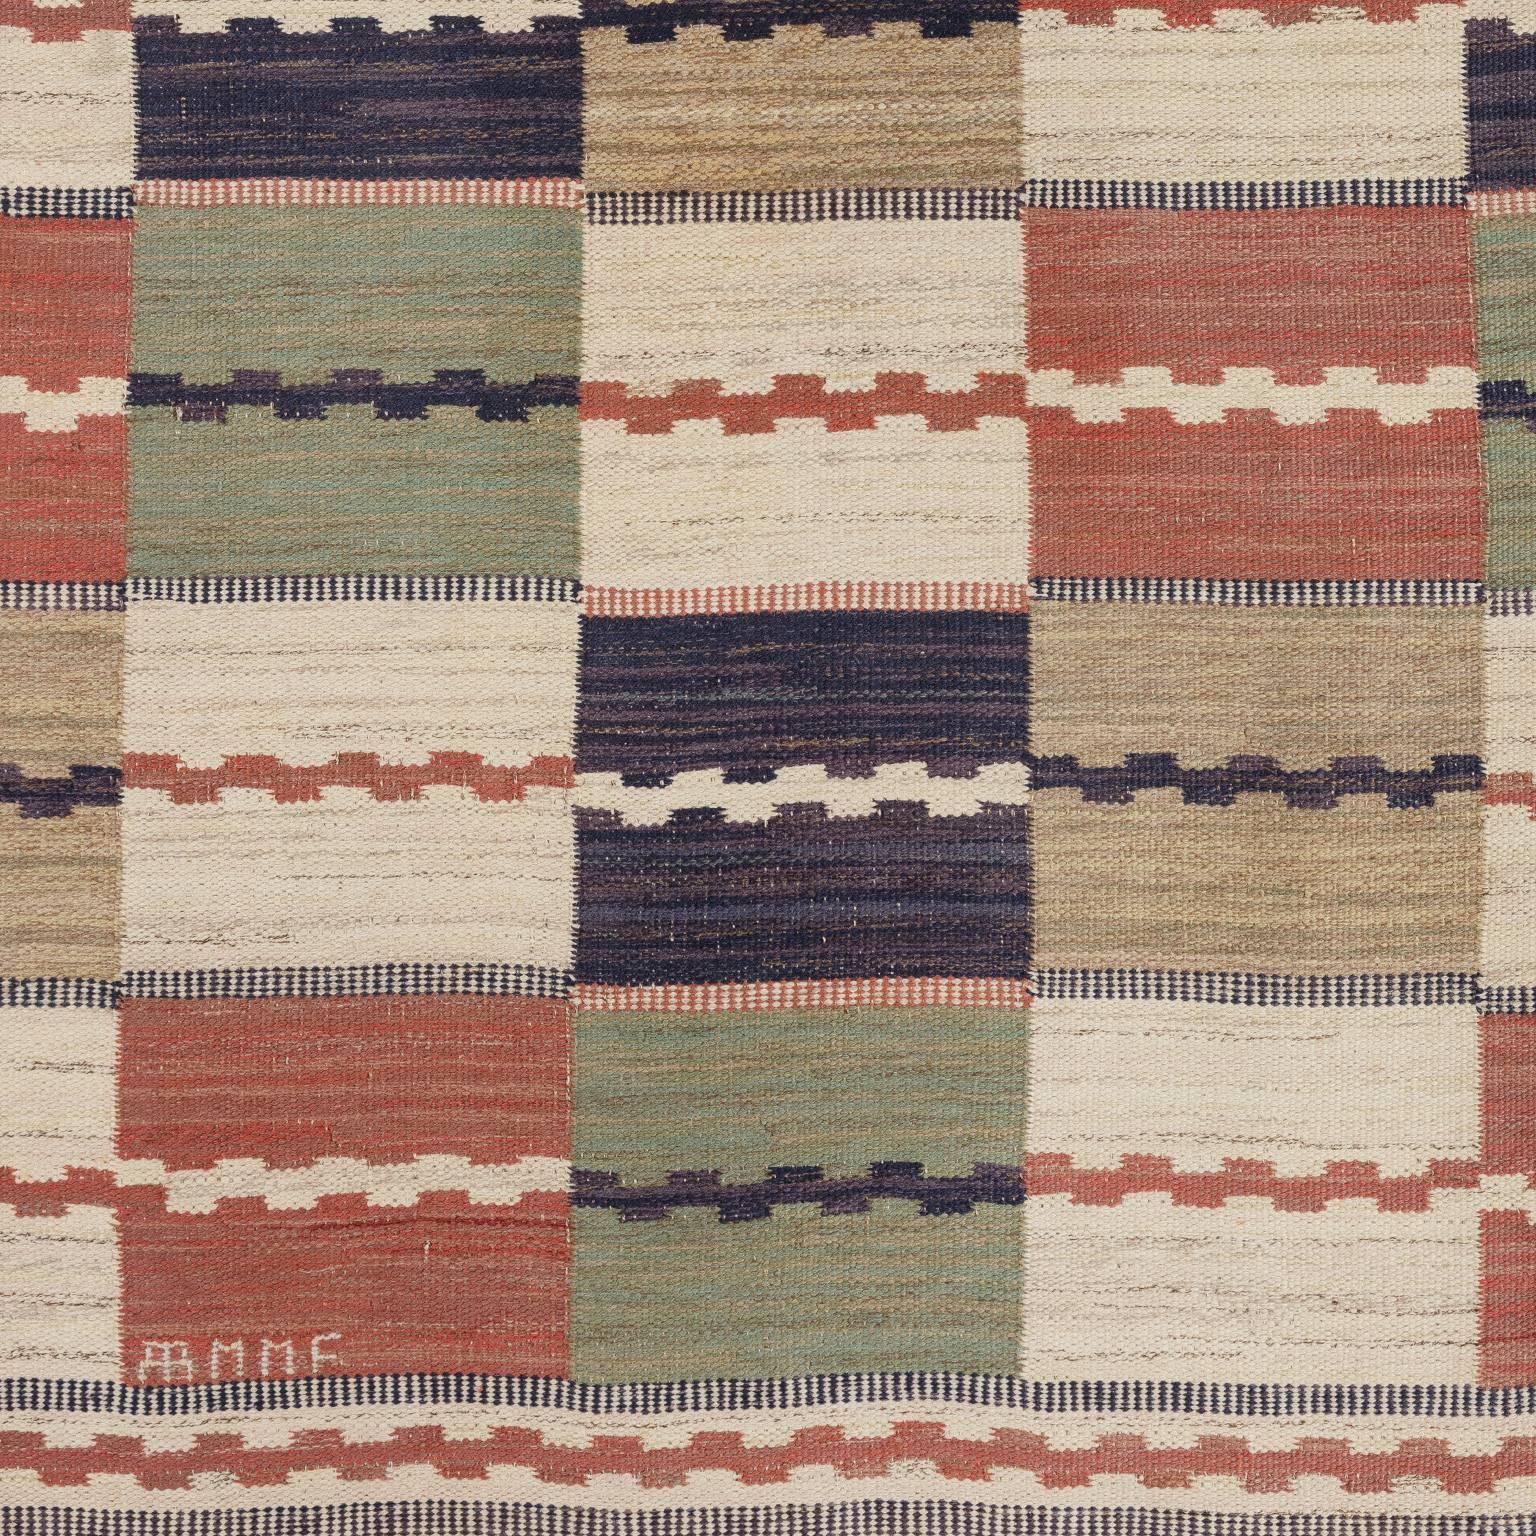 Swedish handwoven Scandinavian Classic rug by Marta Maas-Fjetterström are the absolute finest rugs manufactured in Scandinavia this past century. The 